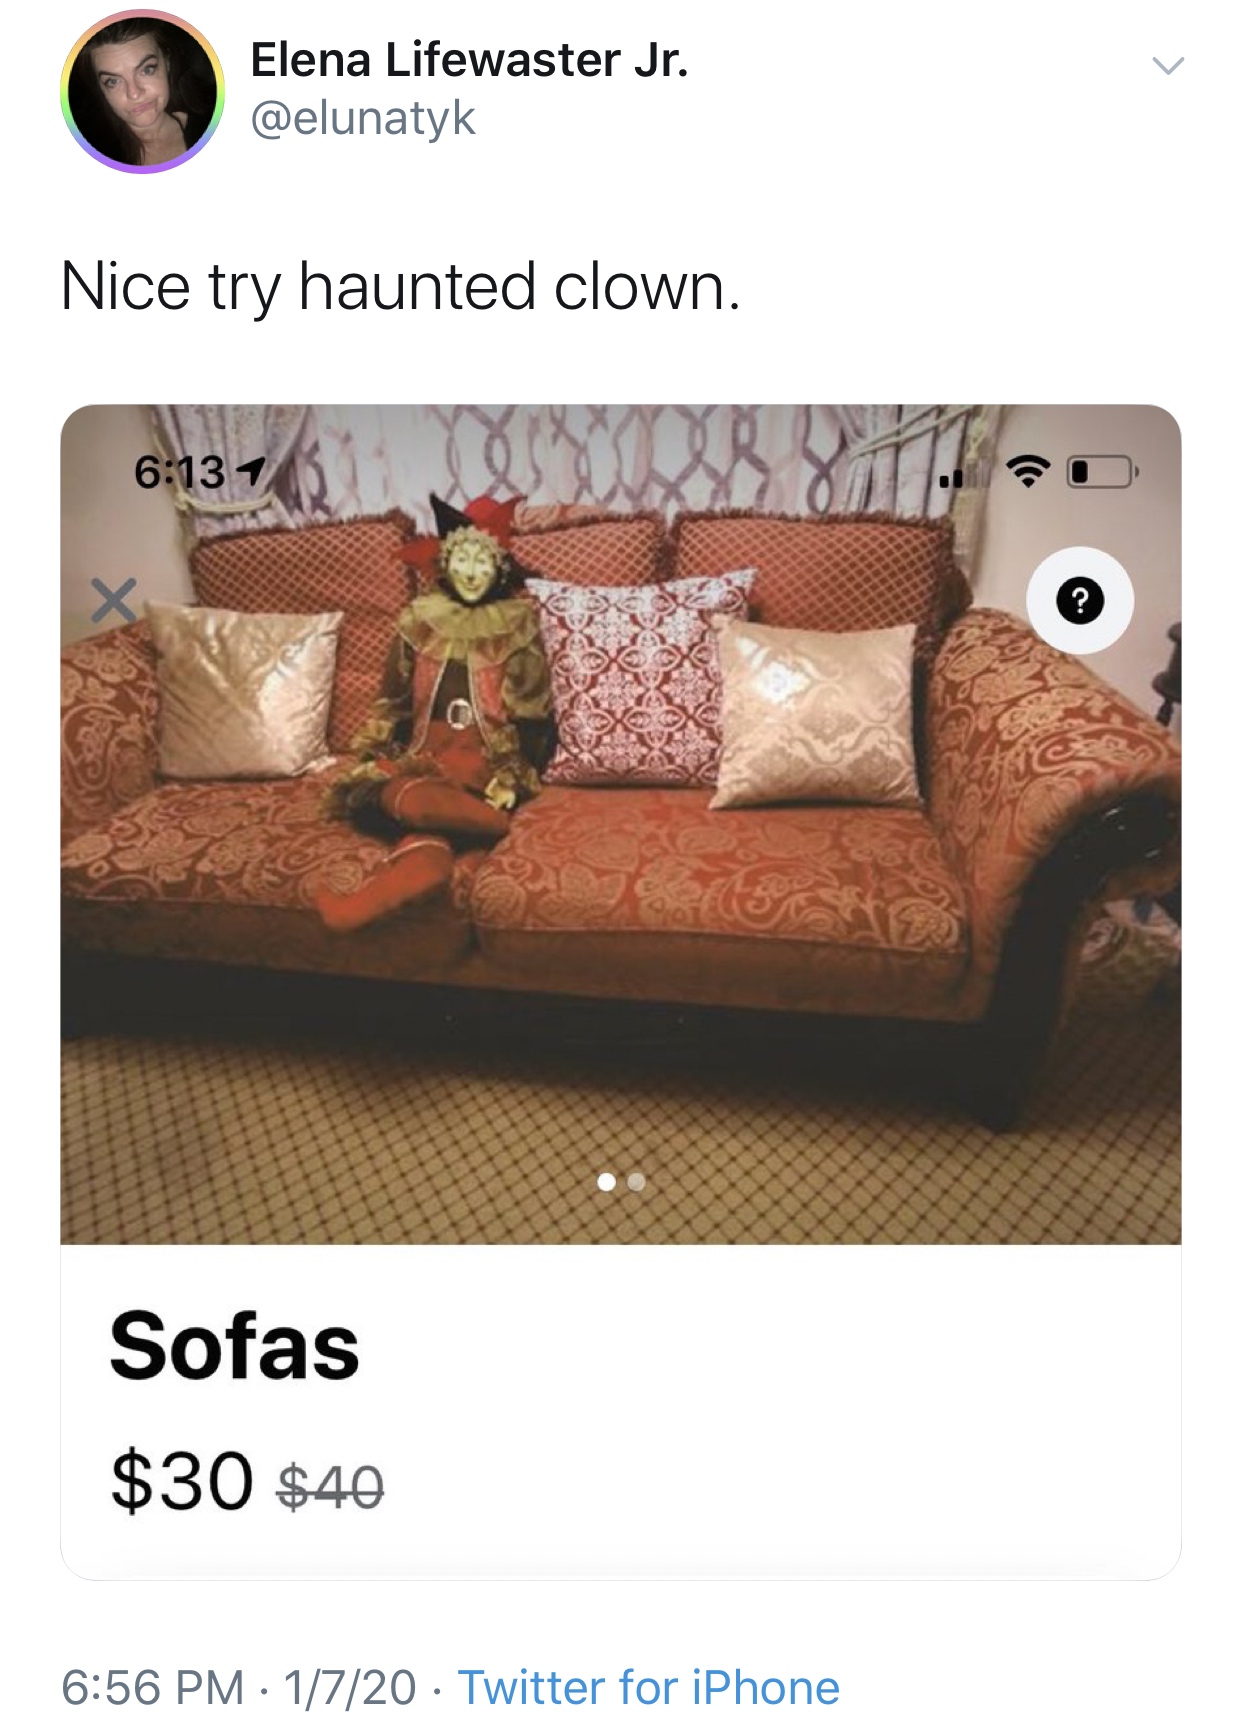 couch - Elena Lifewaster Jr. Nice try haunted clown. Xoxo Sofas $30 $40 1720 Twitter for iPhone